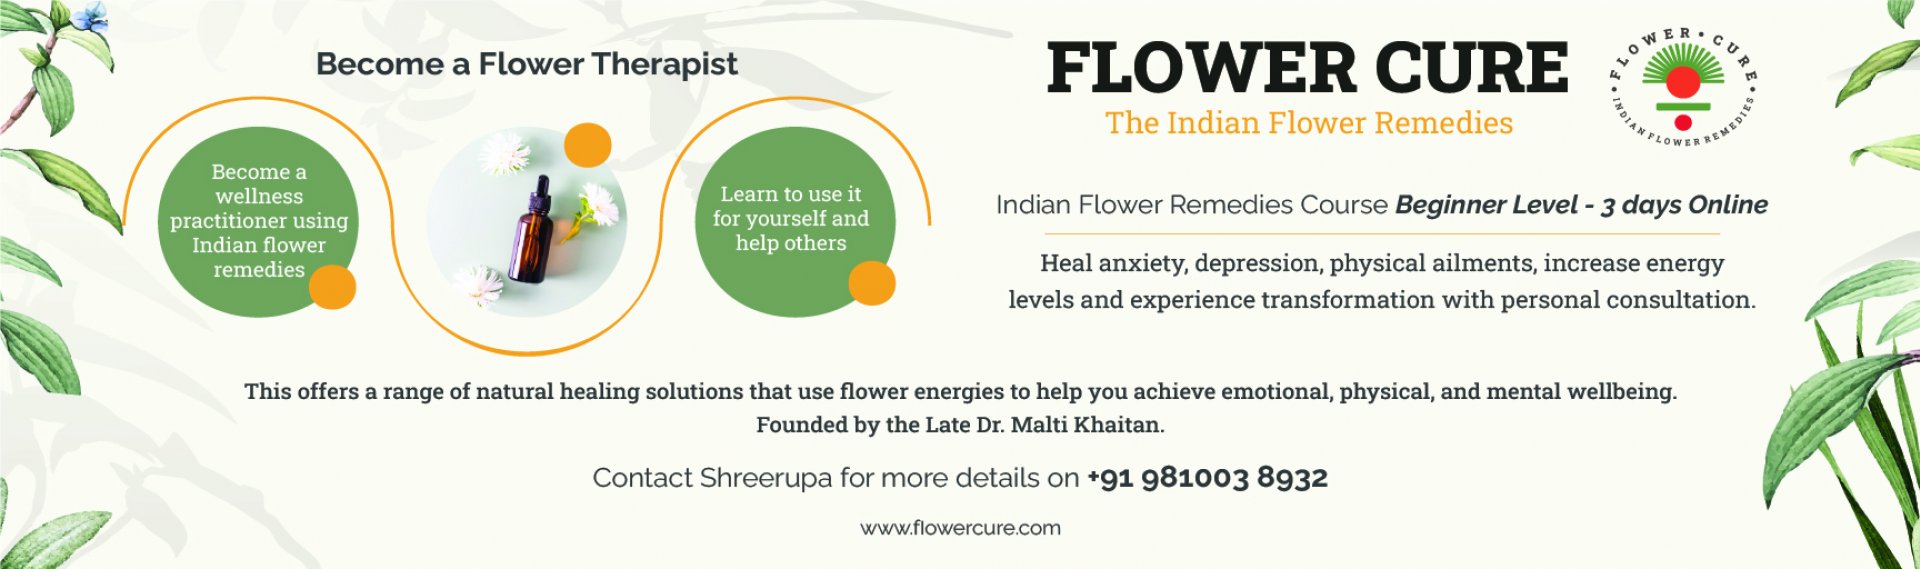 Flower cure - The Indian flower cure remedies